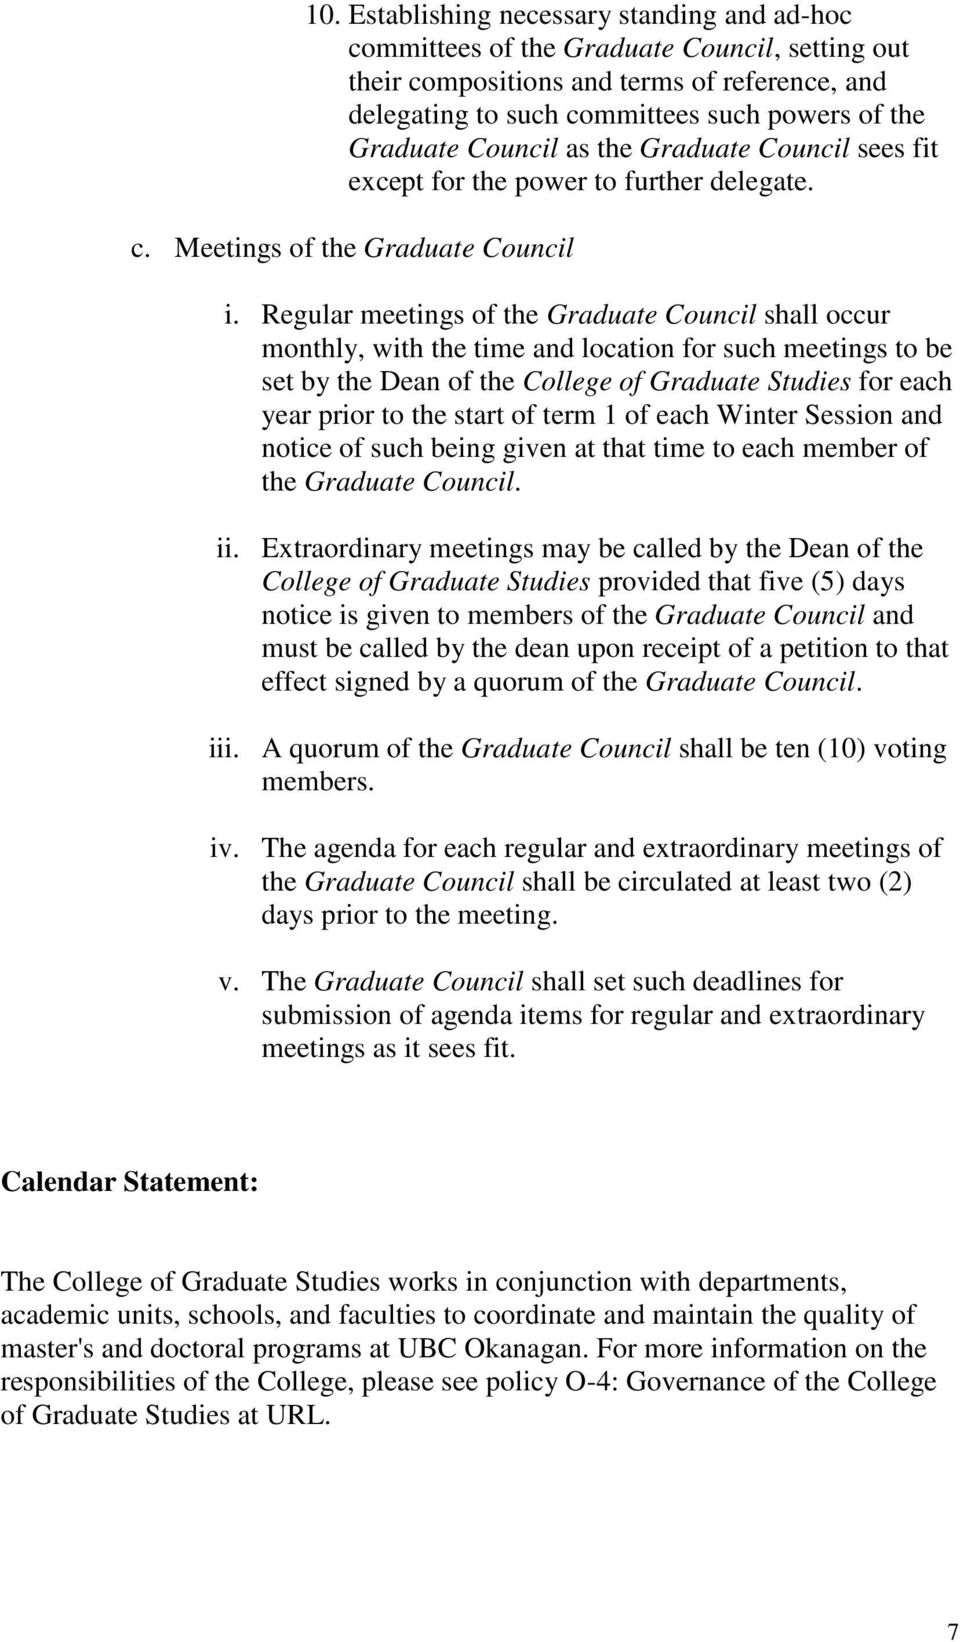 Regular meetings of the Graduate Council shall occur monthly, with the time and location for such meetings to be set by the Dean of the College of Graduate Studies for each year prior to the start of